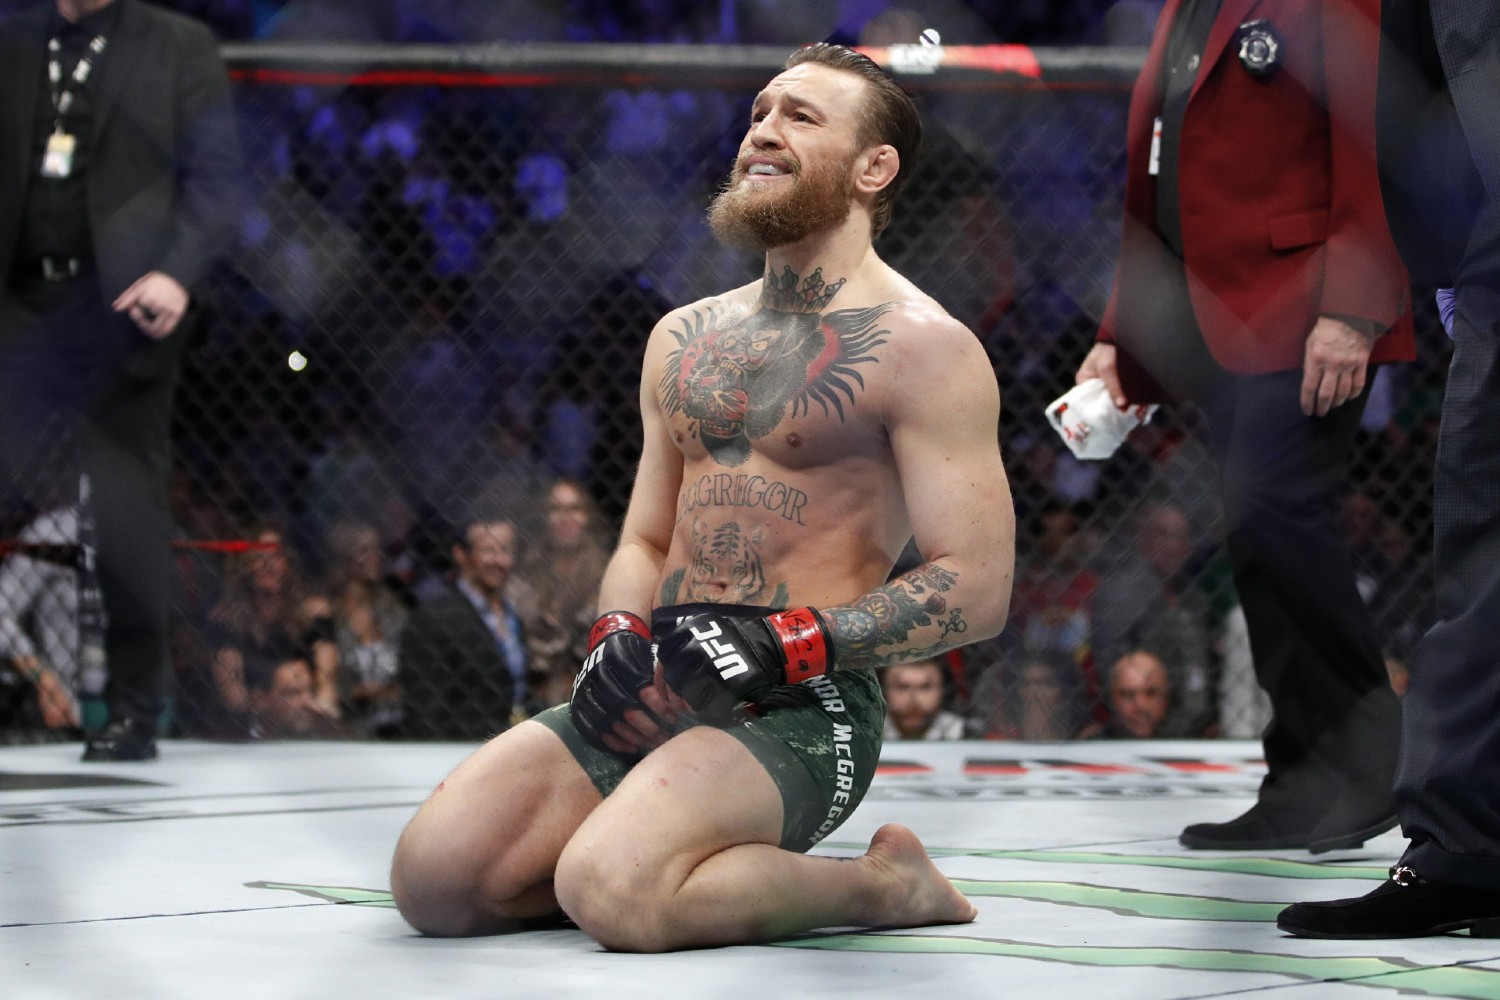 His next match: When is Conor McGregor's comeback fight ...